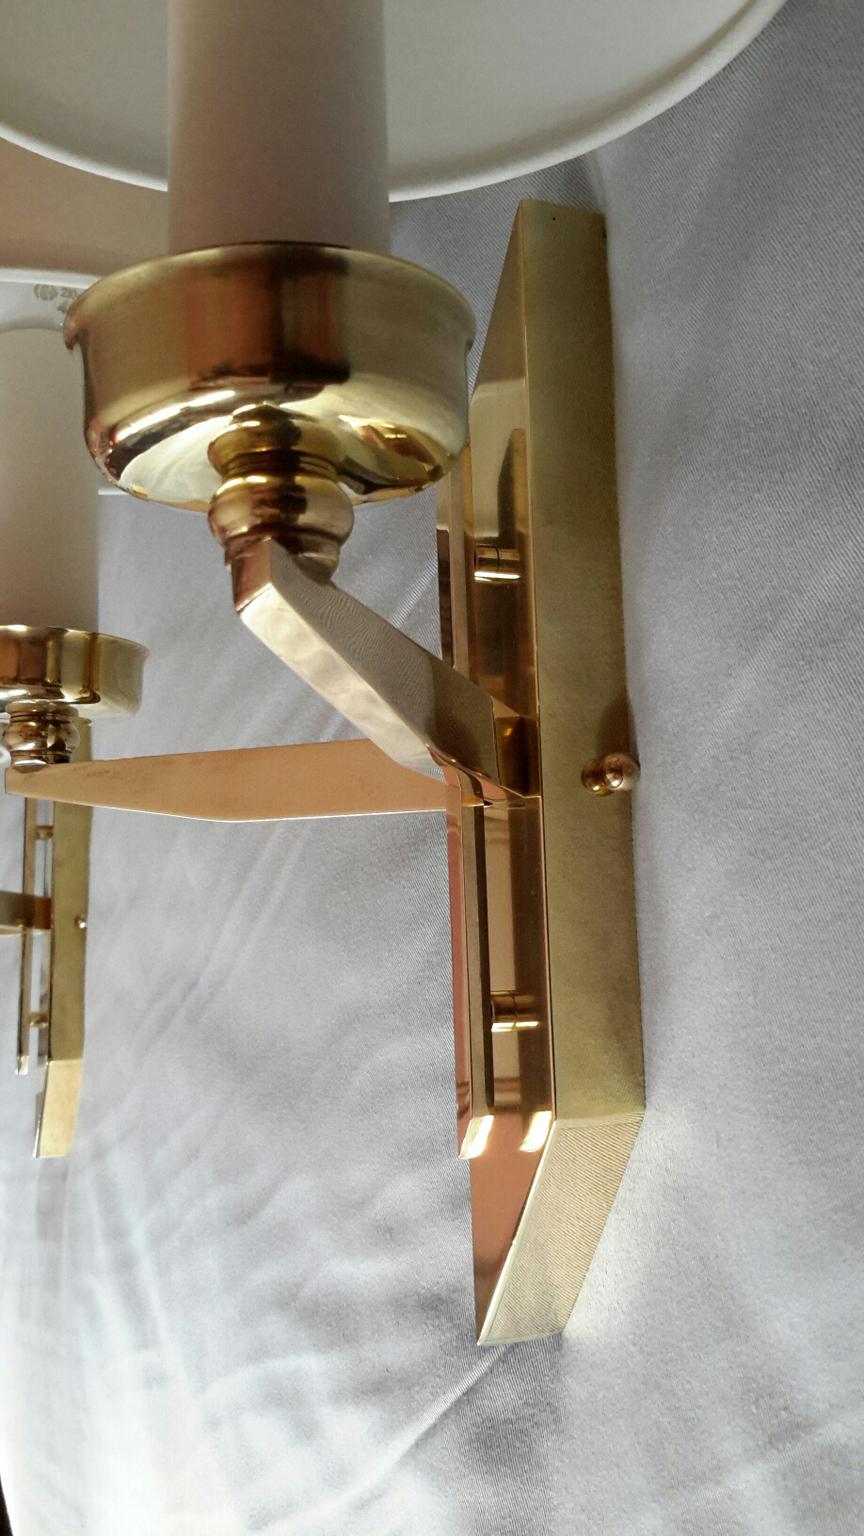 Pair of French Mid-Century Modern Sconces by Maison Lunel, 1950 For Sale 1